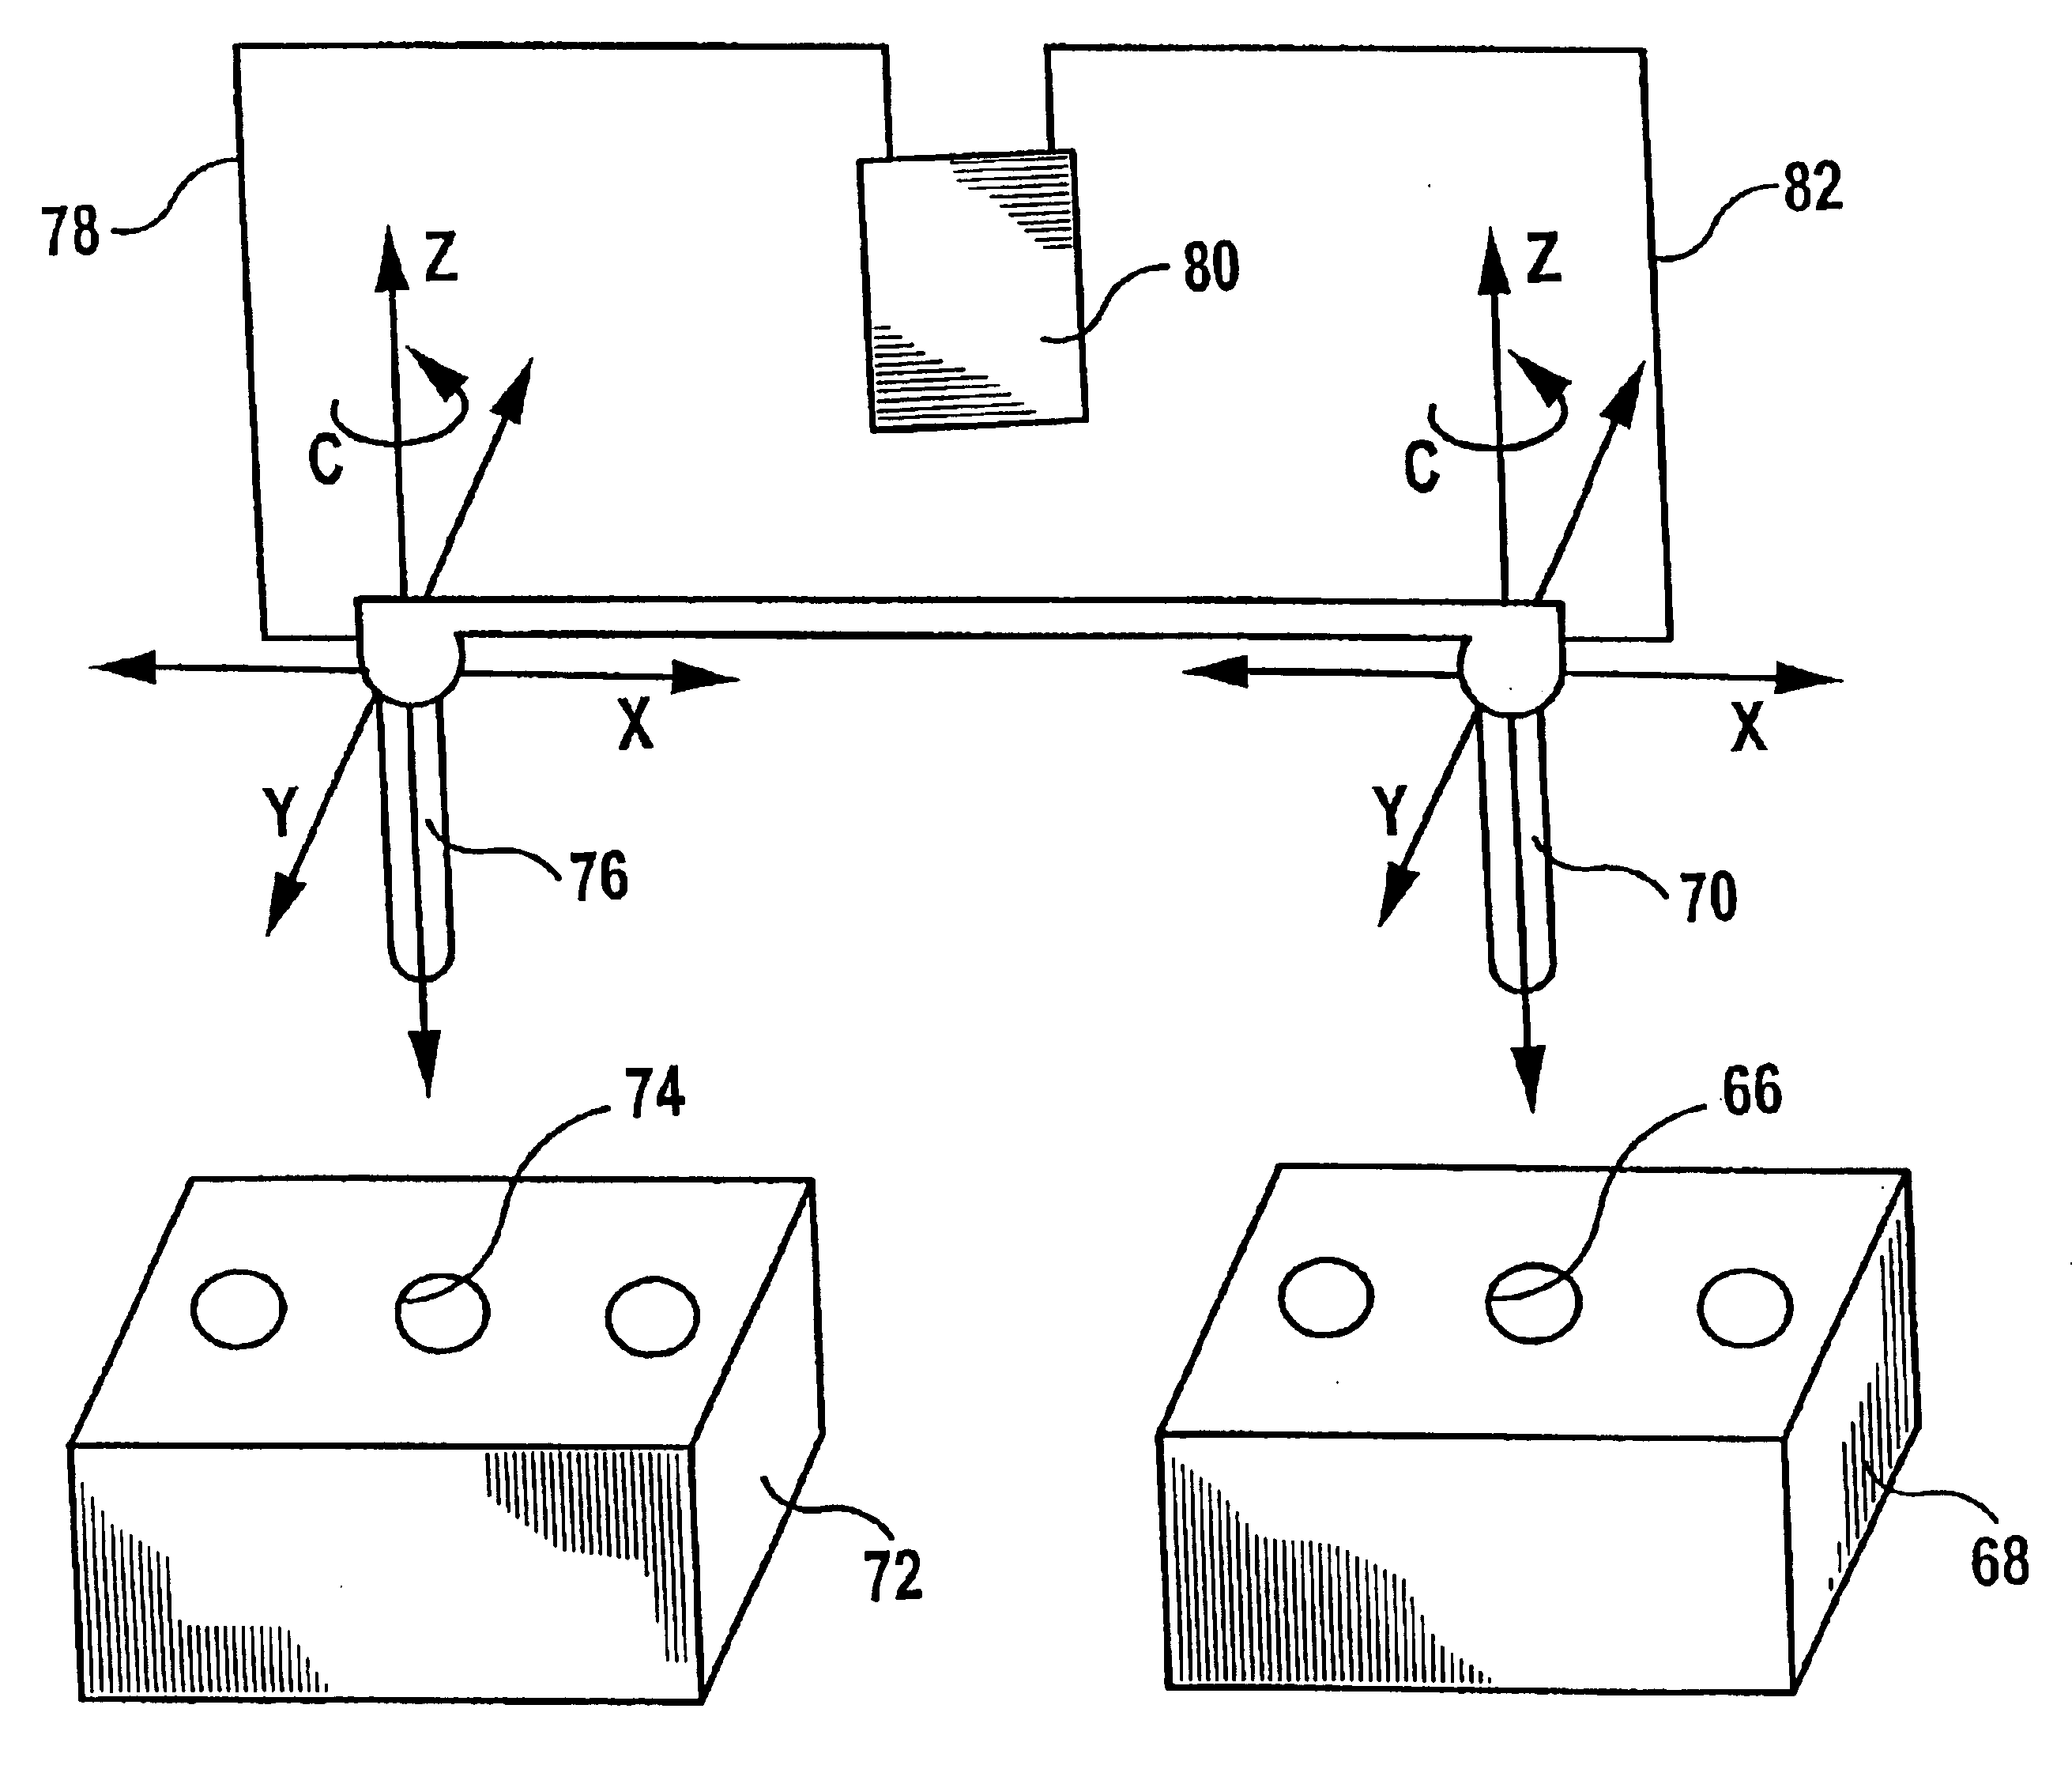 Device and method for checking bores in or edges on an object of measurement